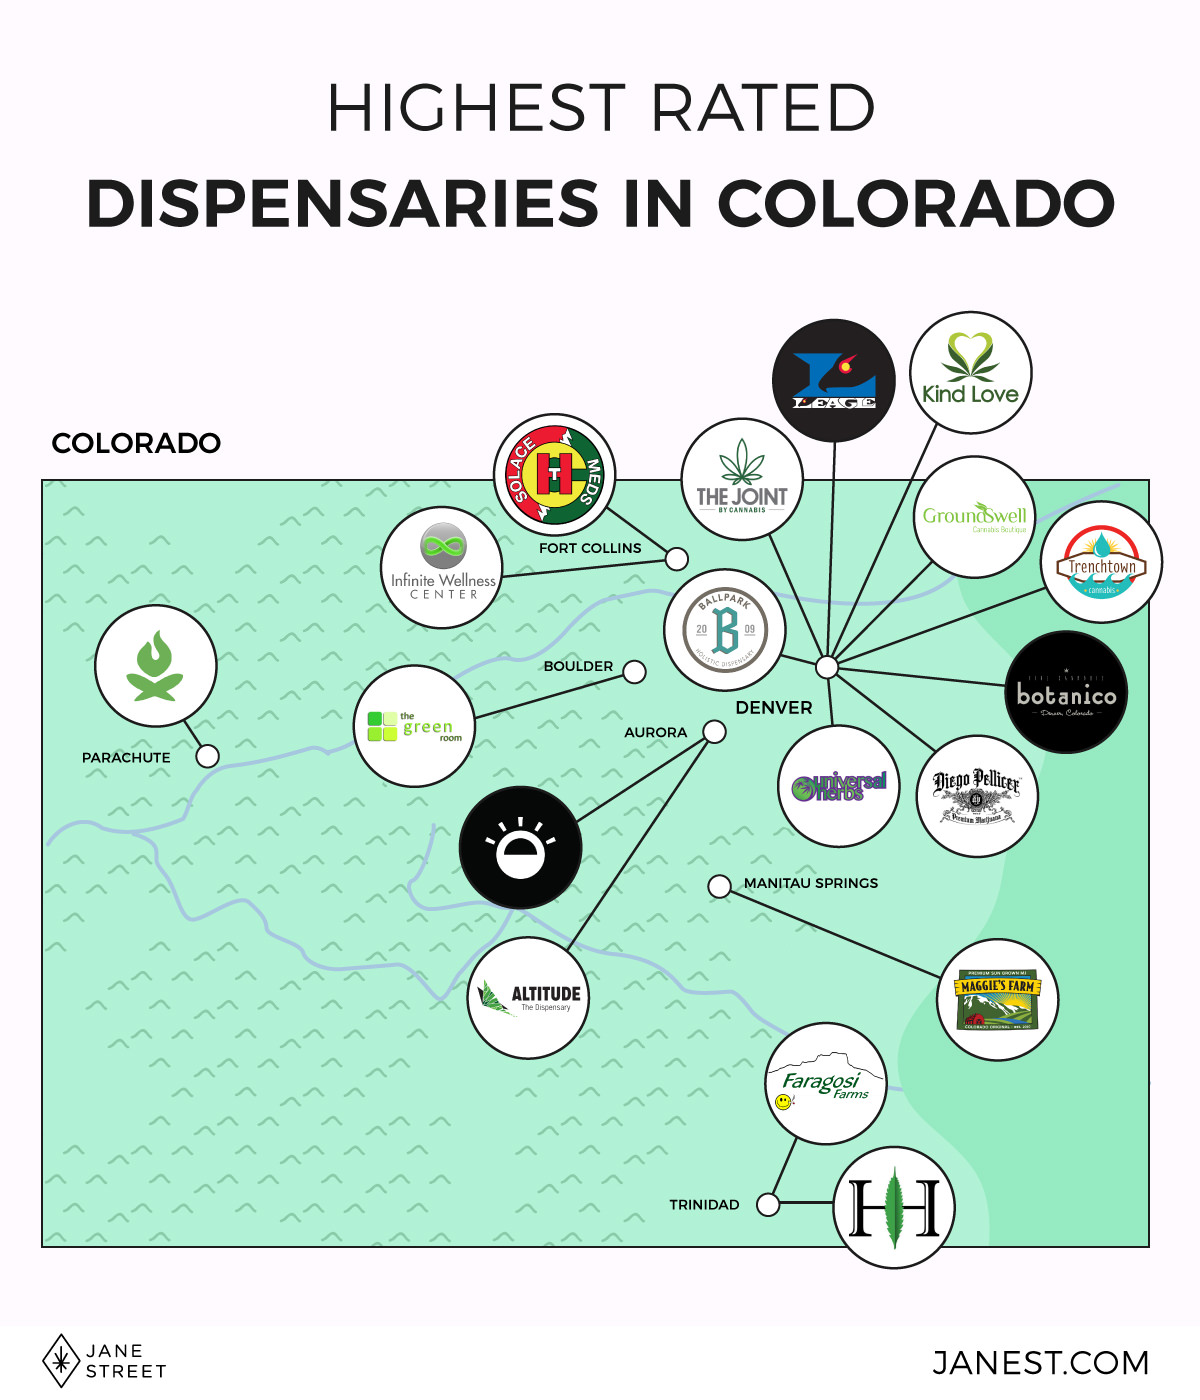 The Highest Rated Dispensaries In Colorado - MAP